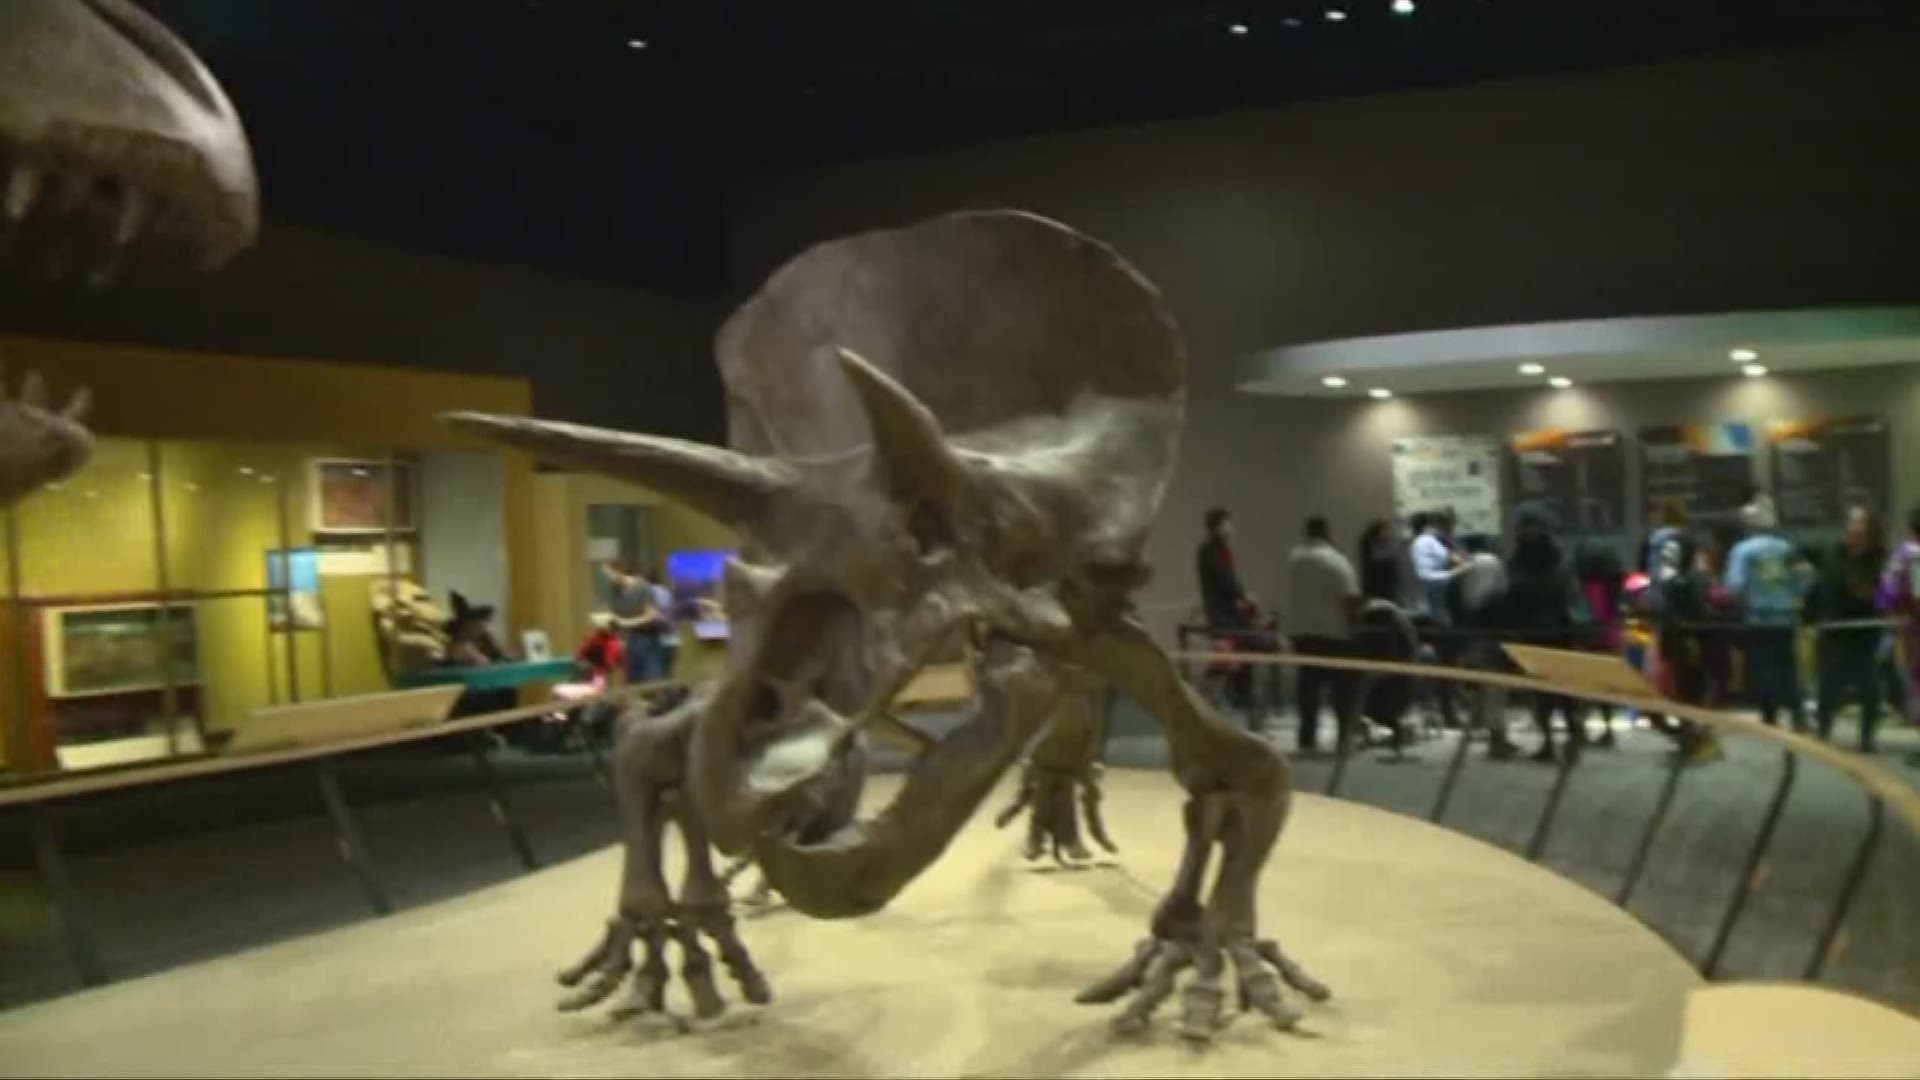 Cleveland Museum of Natural History to expand after receiving state funds